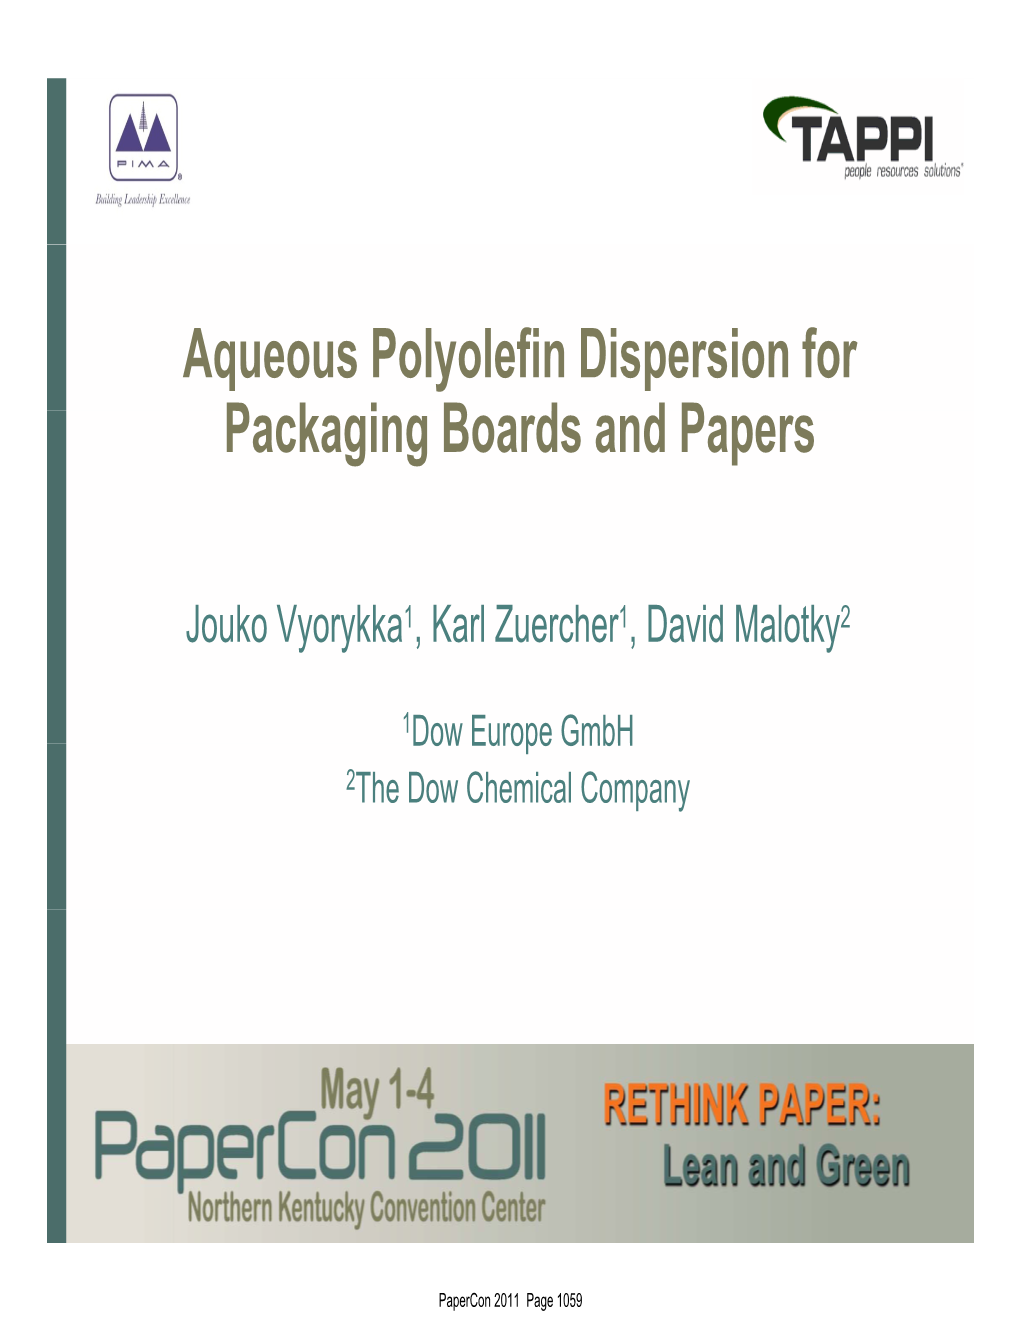 Aqueous Polyolefin Dispersion for Packaging Boards and Papers